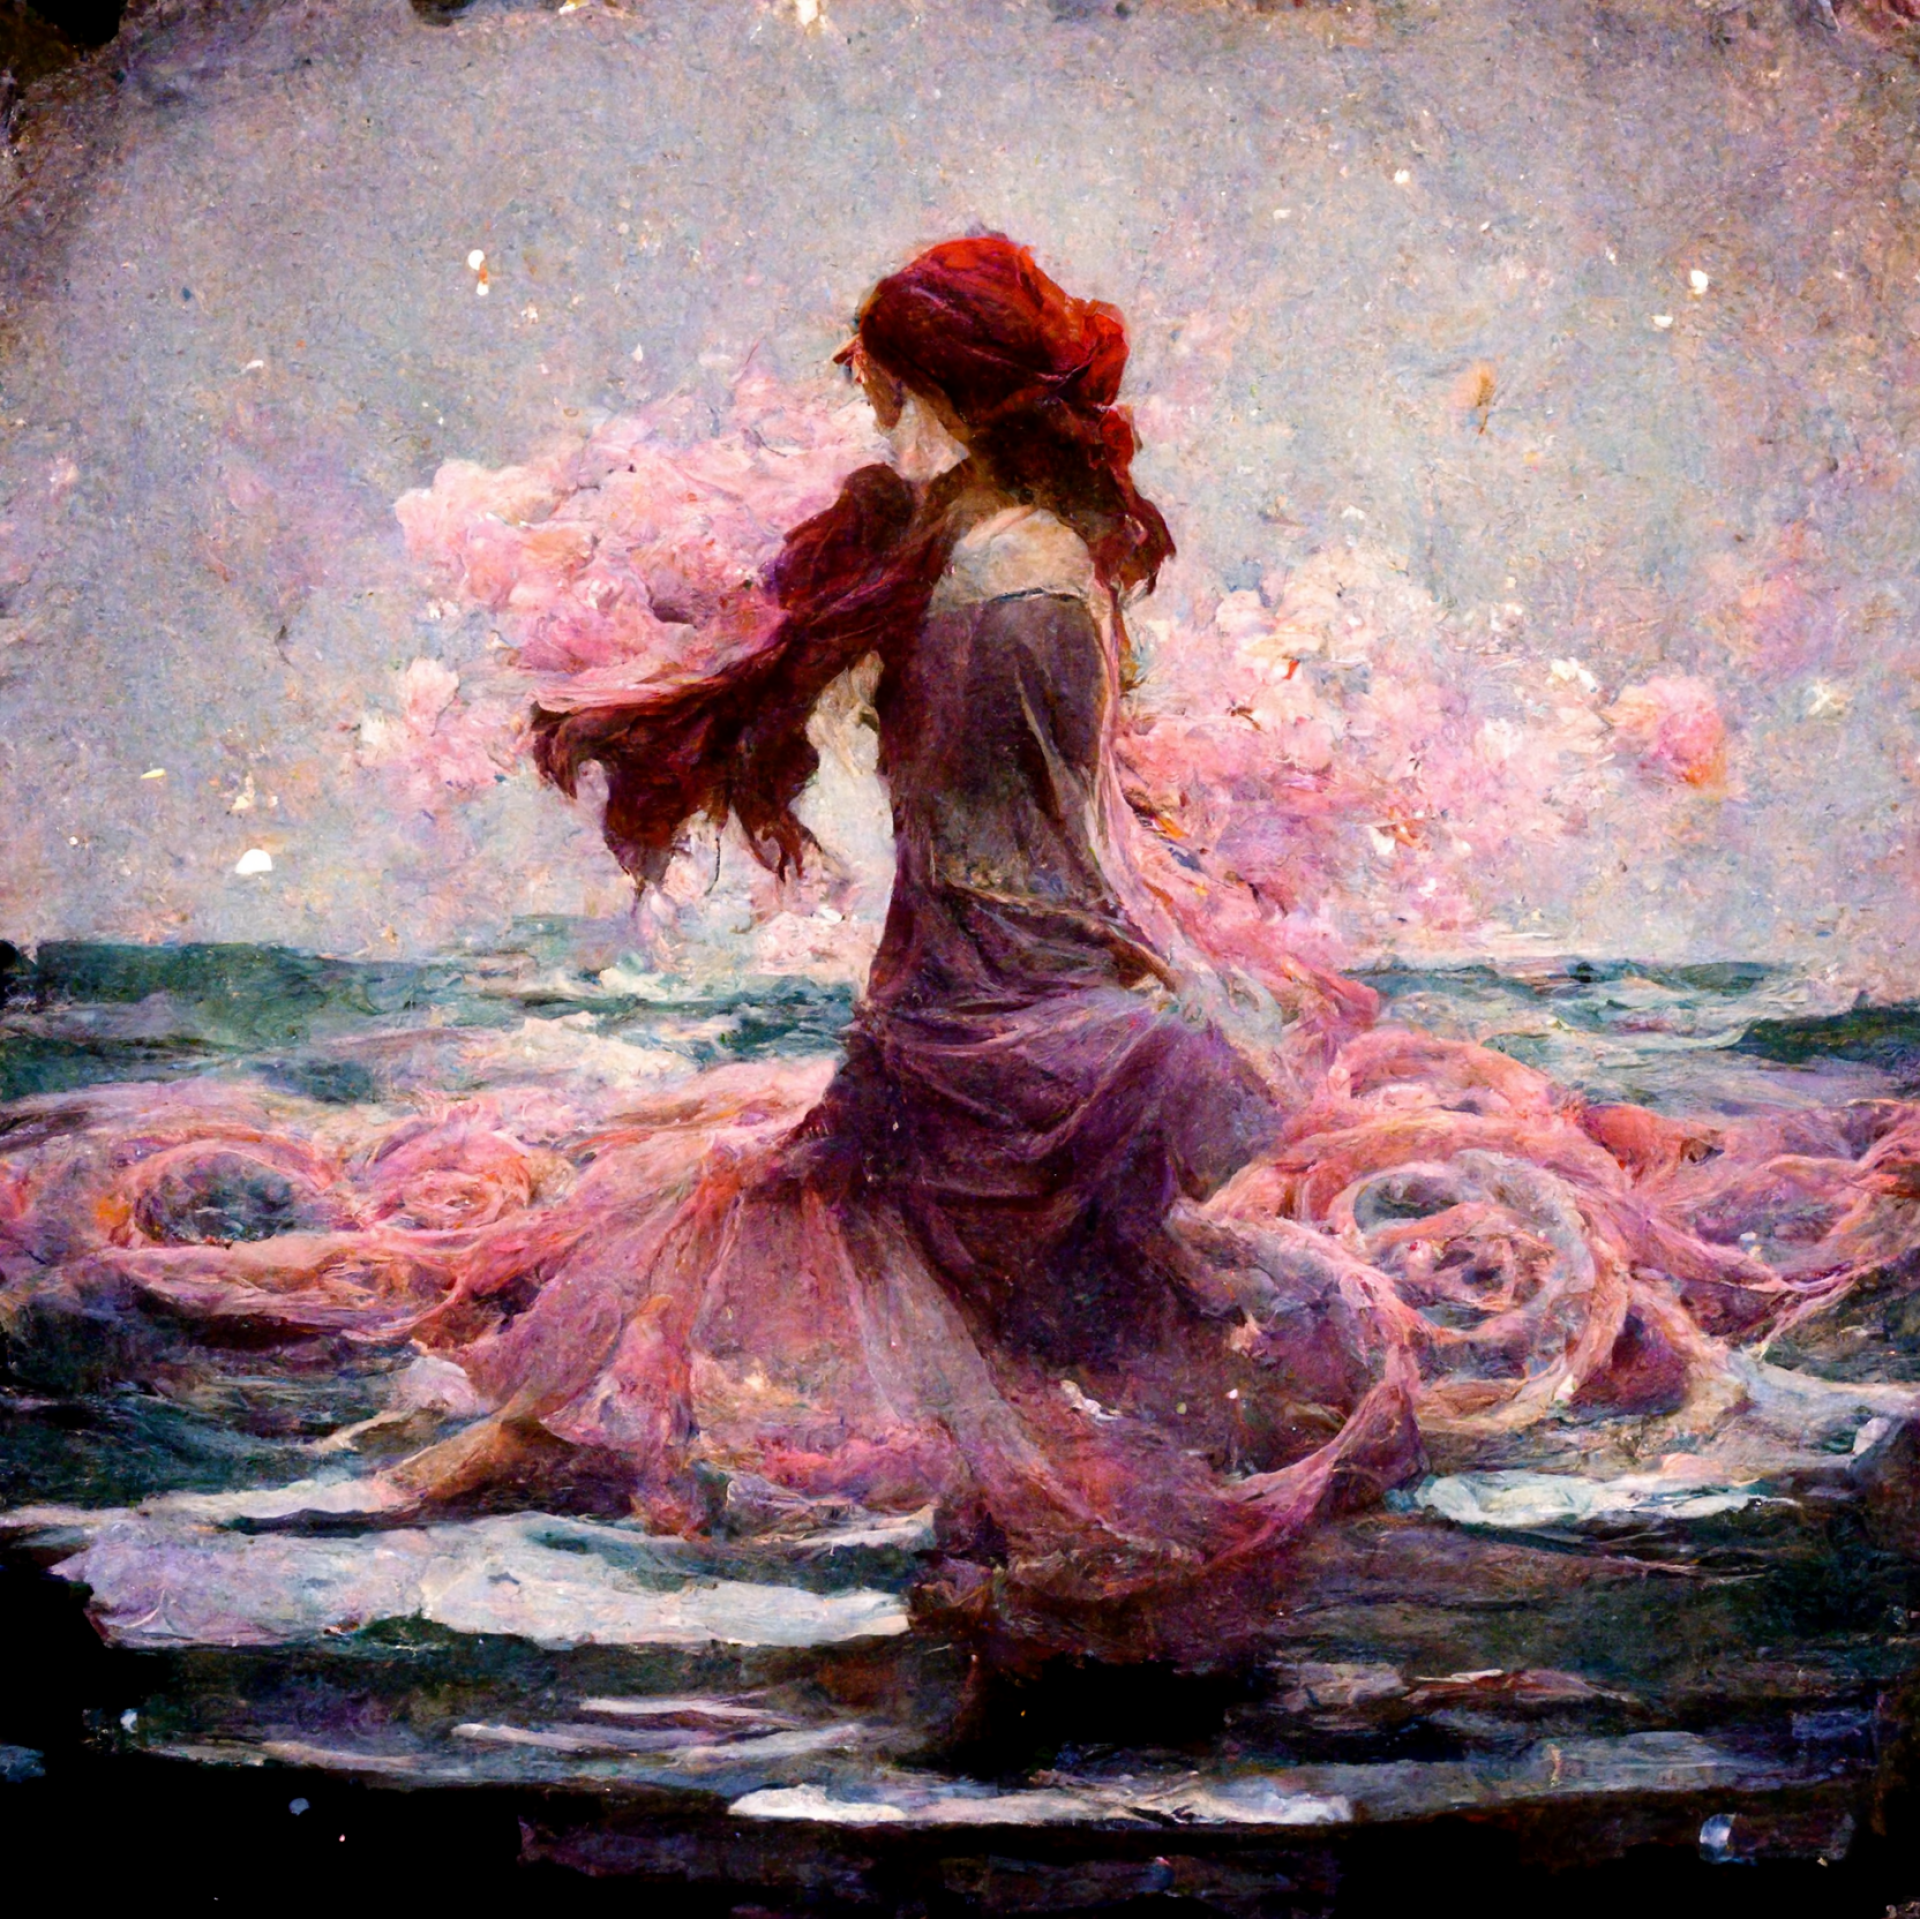 Thumbnail of - AI-generated image from Midjourney, the Faroe Islands inspired by William Waterhouse.